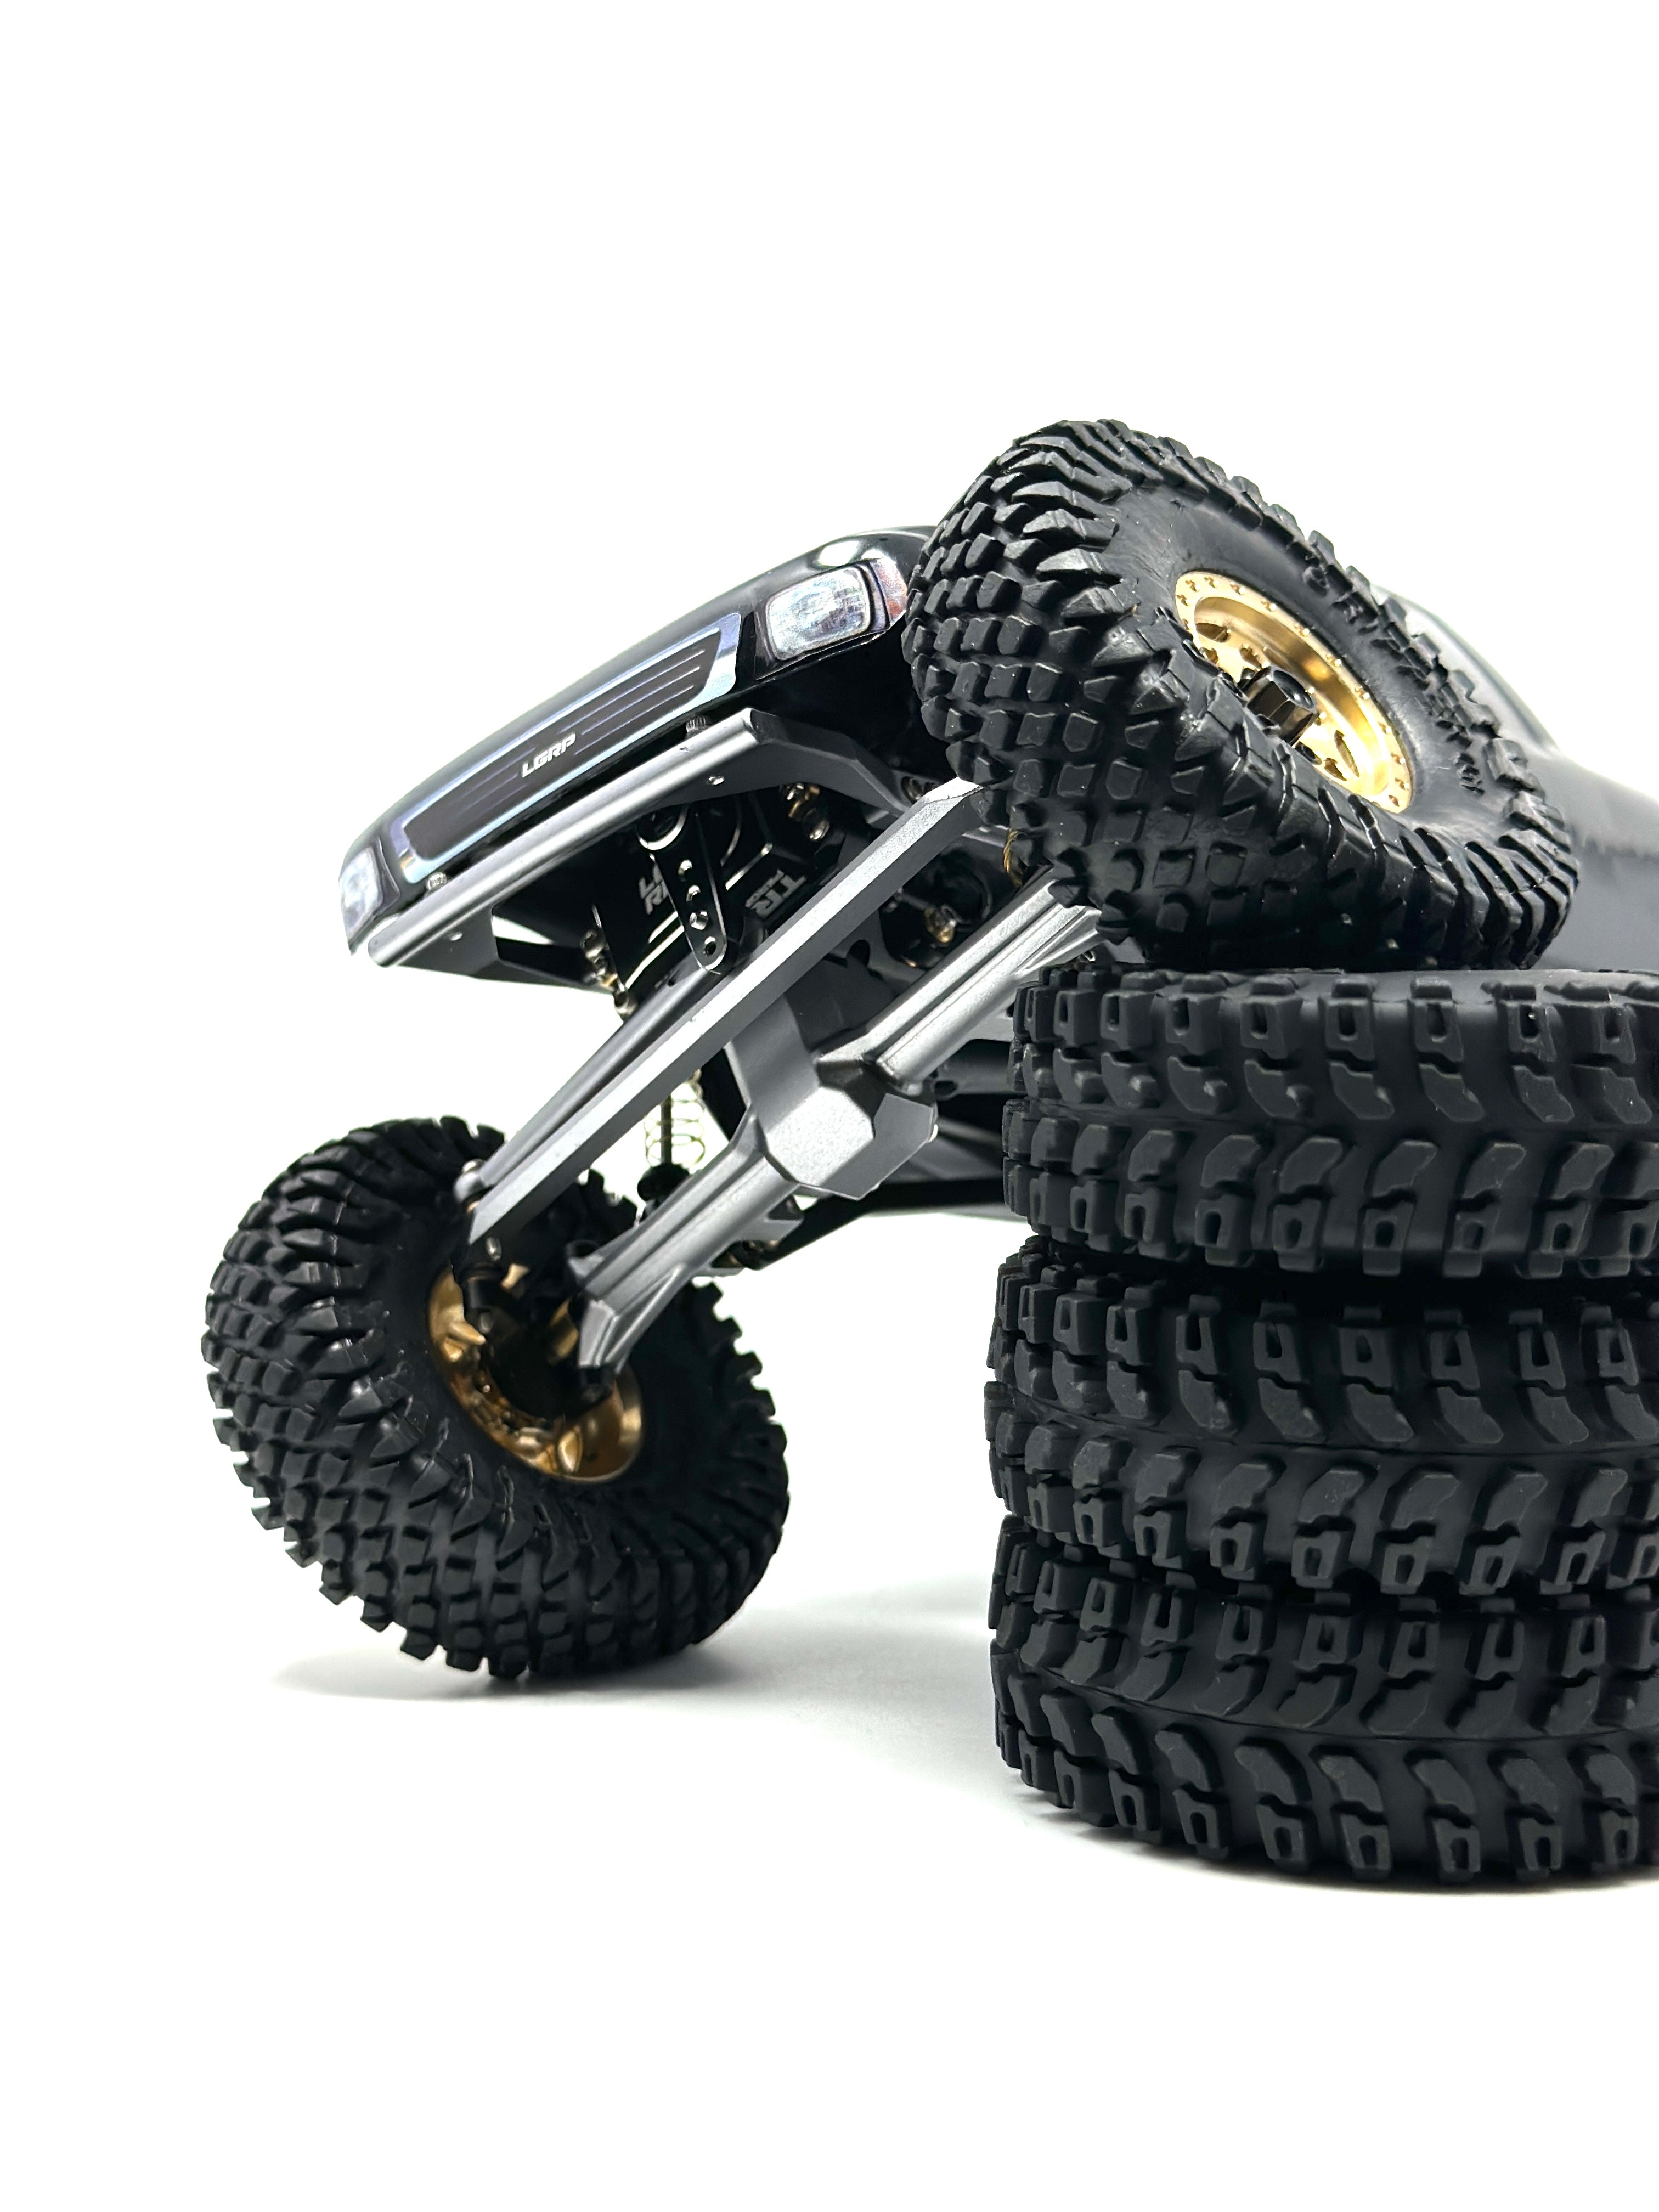 Super 8 Axle Bundle (front and rear)